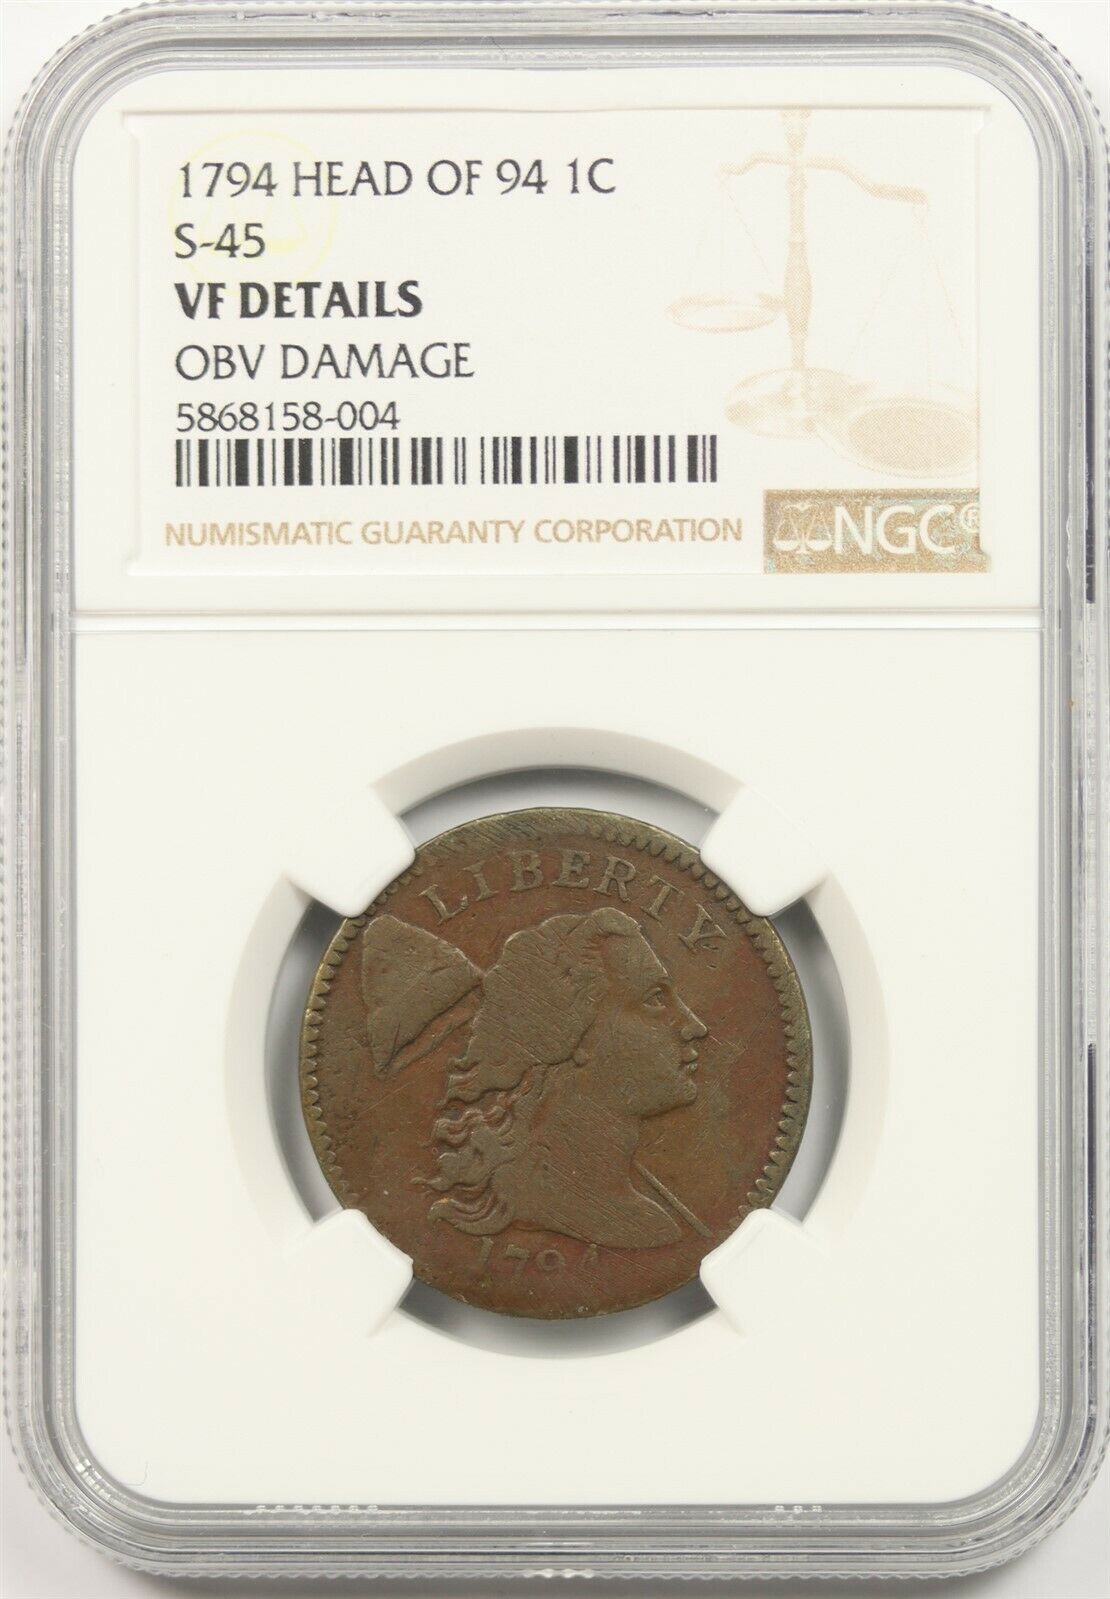 1794 Head Of 94 S-45 1c Vf Details (obv Damage) Liberty Cap Large Cent